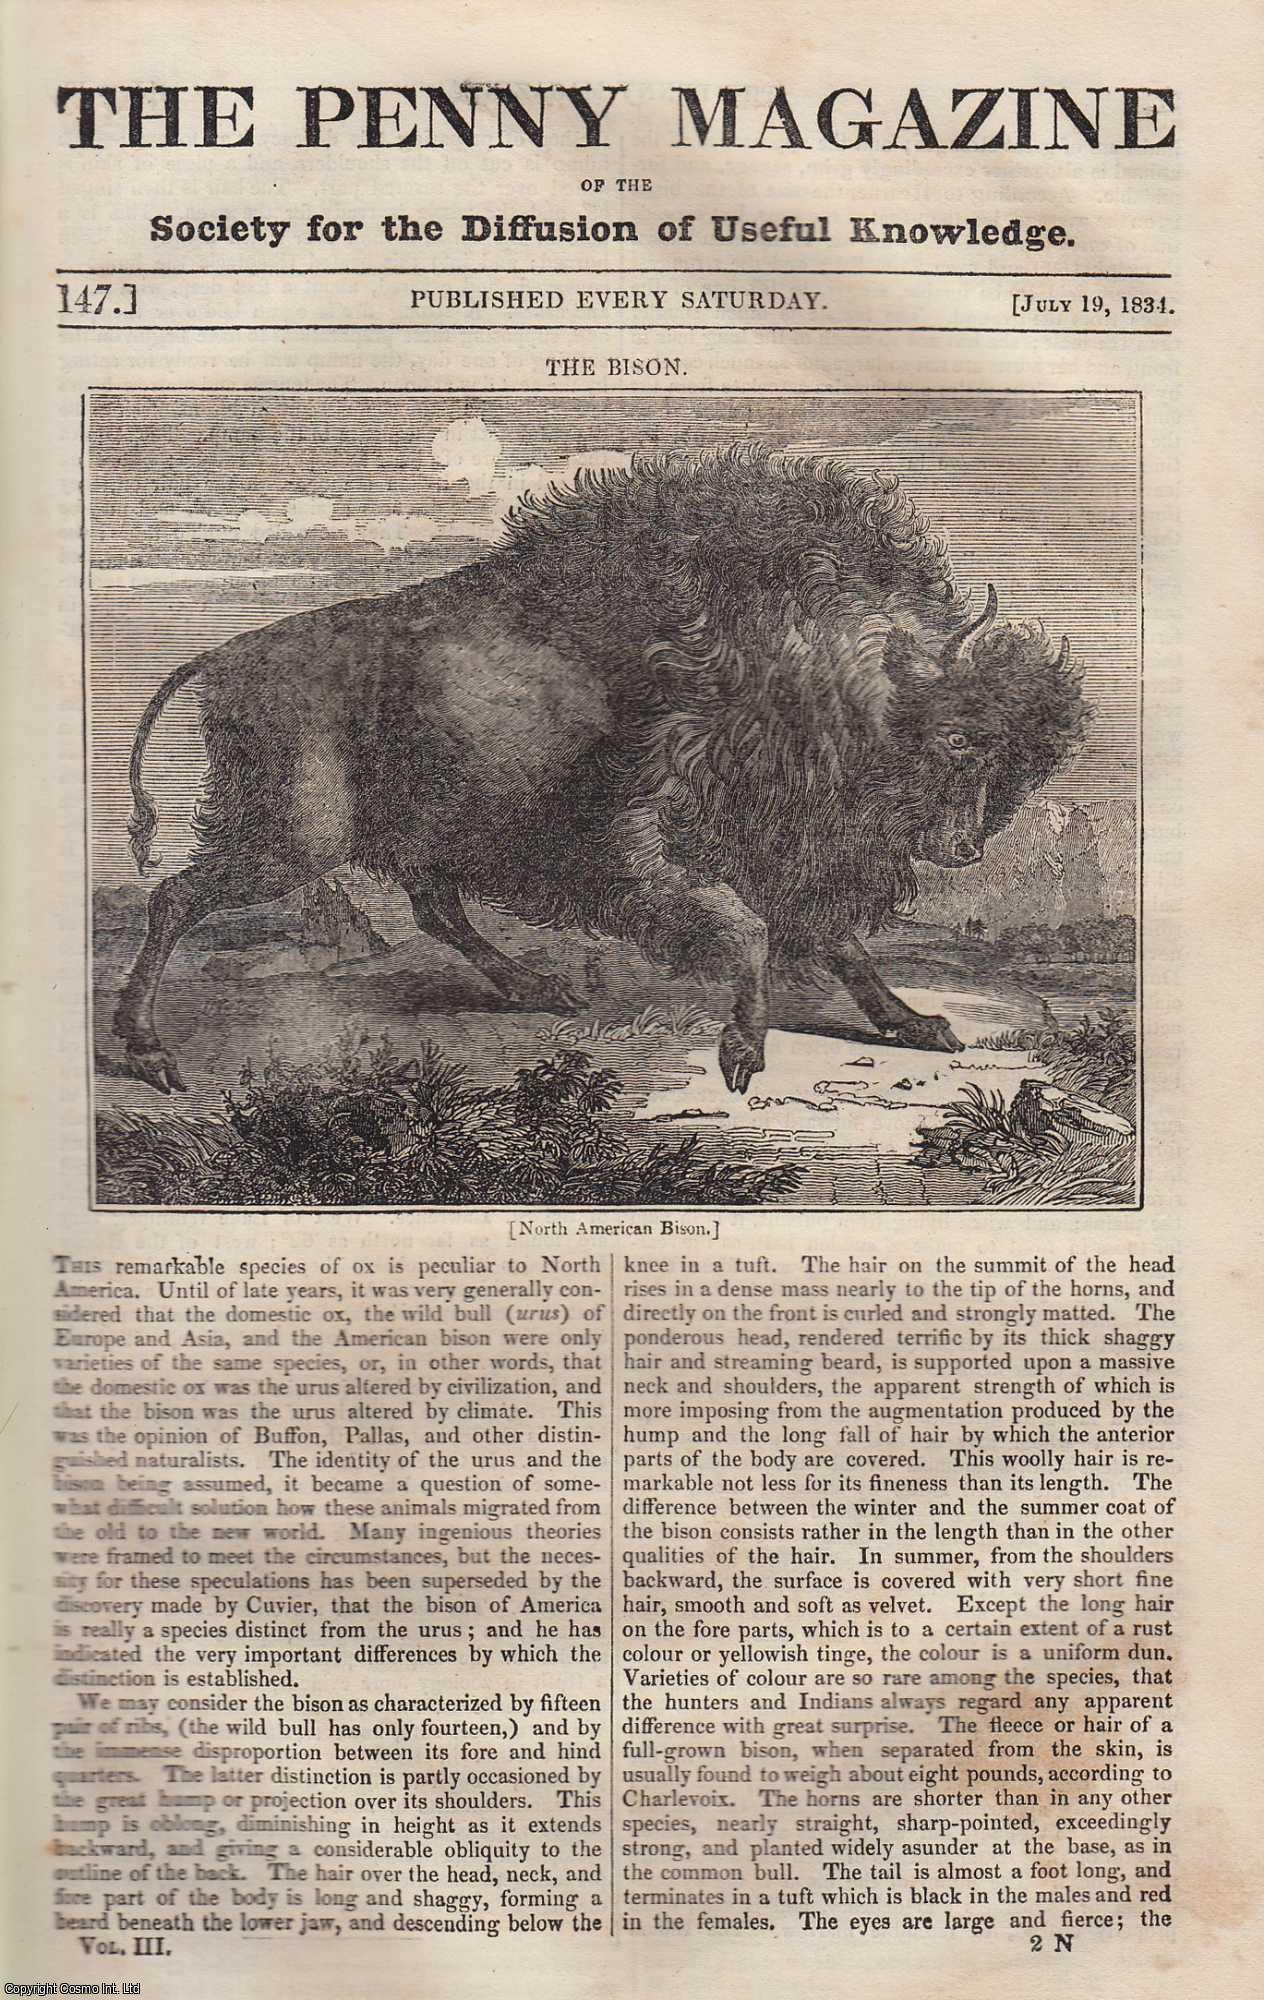 Penny Magazine - The North American Bison (ox); The Island of Capri (Naples); The Bobbin-Net Manufacture (lace making machine), etc. Issue No. 147, July 19th, 1834. A complete original weekly issue of the Penny Magazine, 1834.